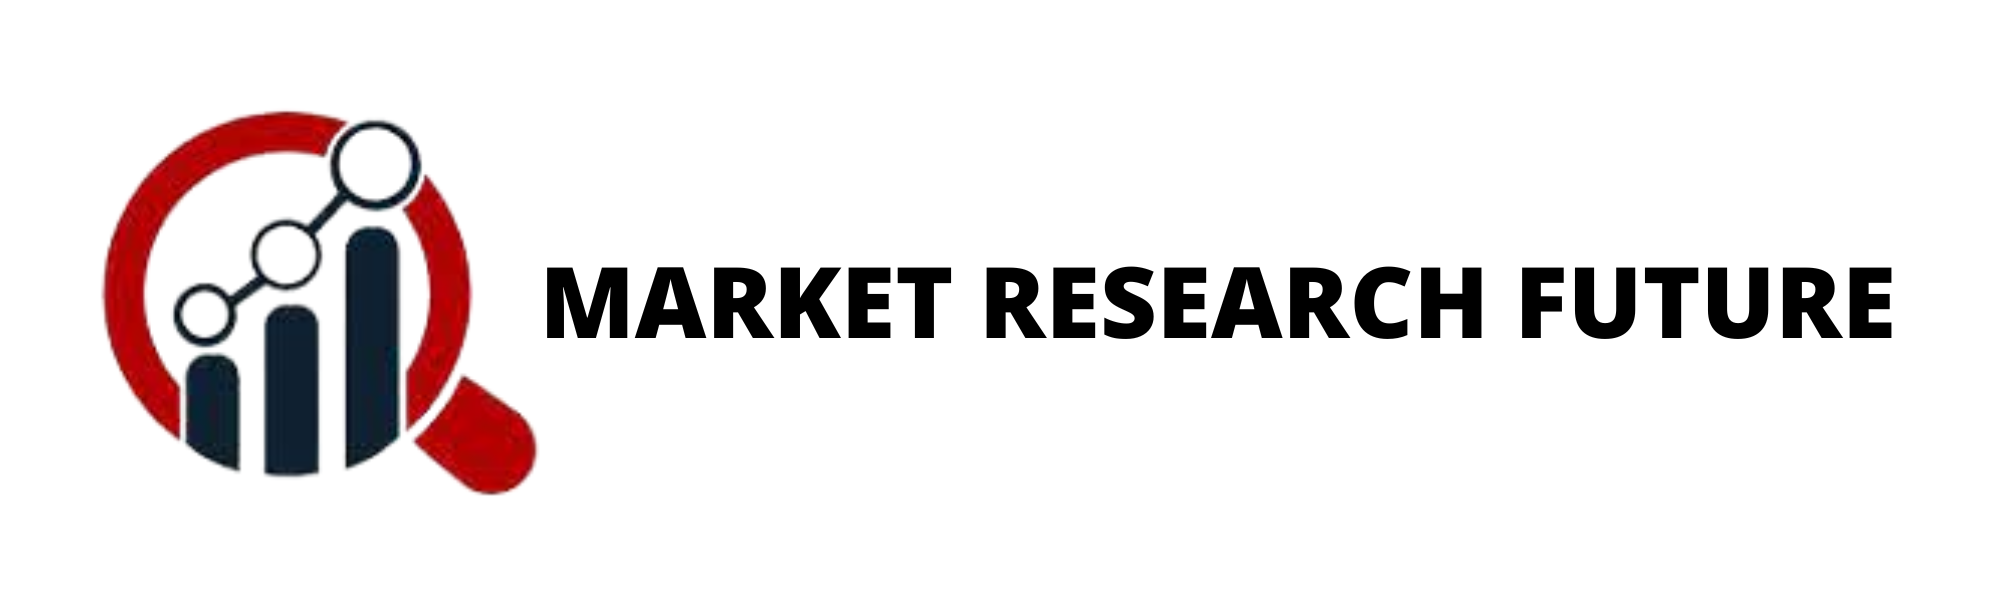 Reactive dyes market Size, Analysis By Demand, Key Players, End...